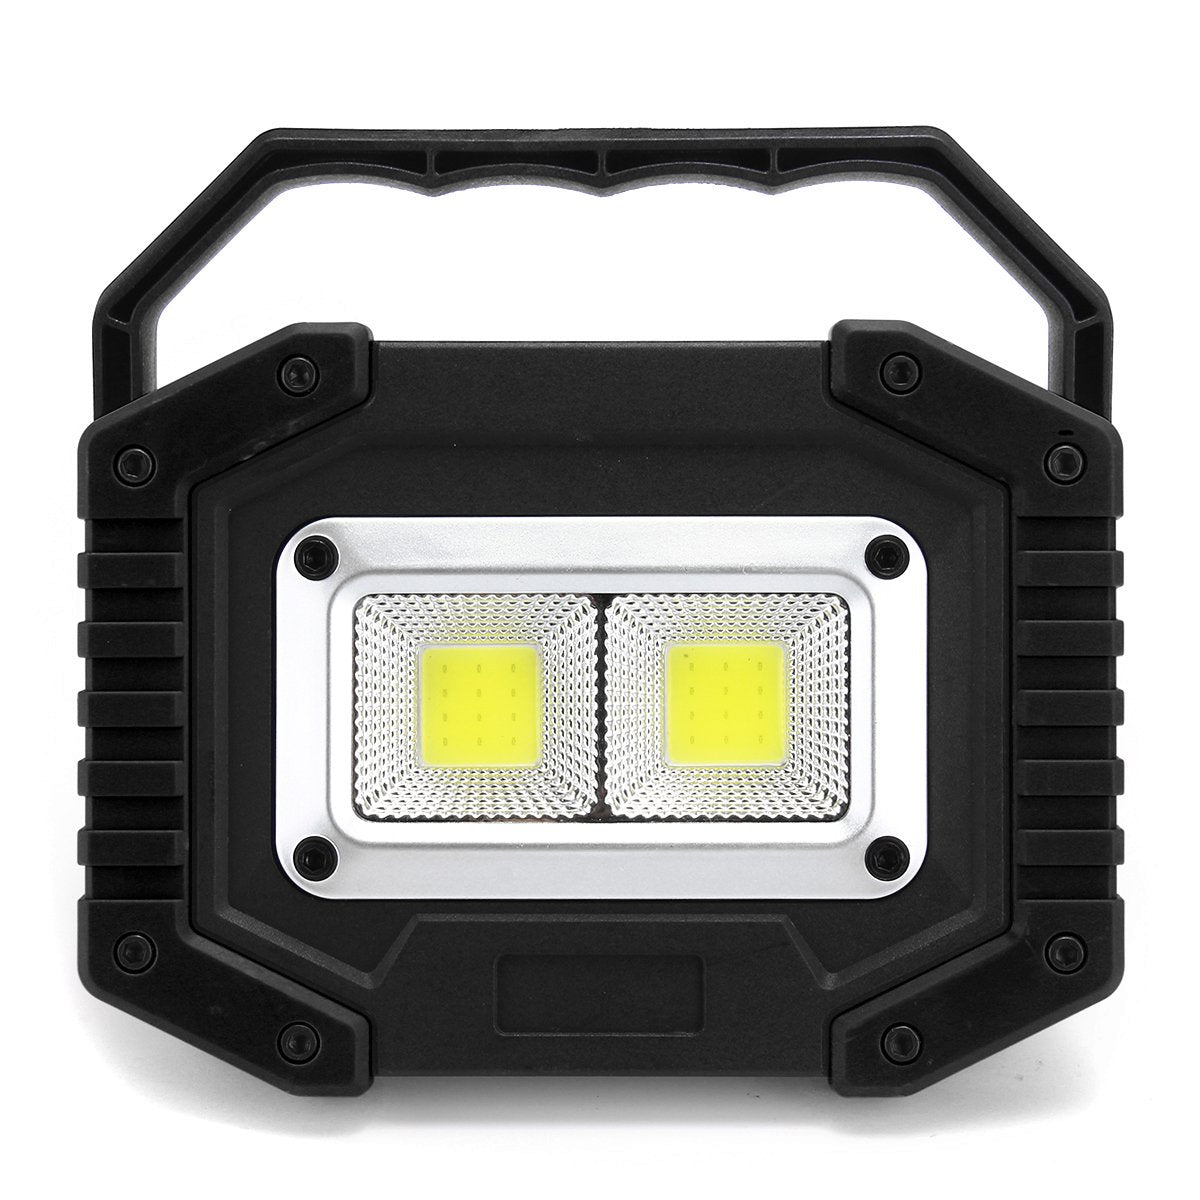 30W LED Work Light for Outdoor Camping, Hiking, Fishing, Emergency Car Repairing